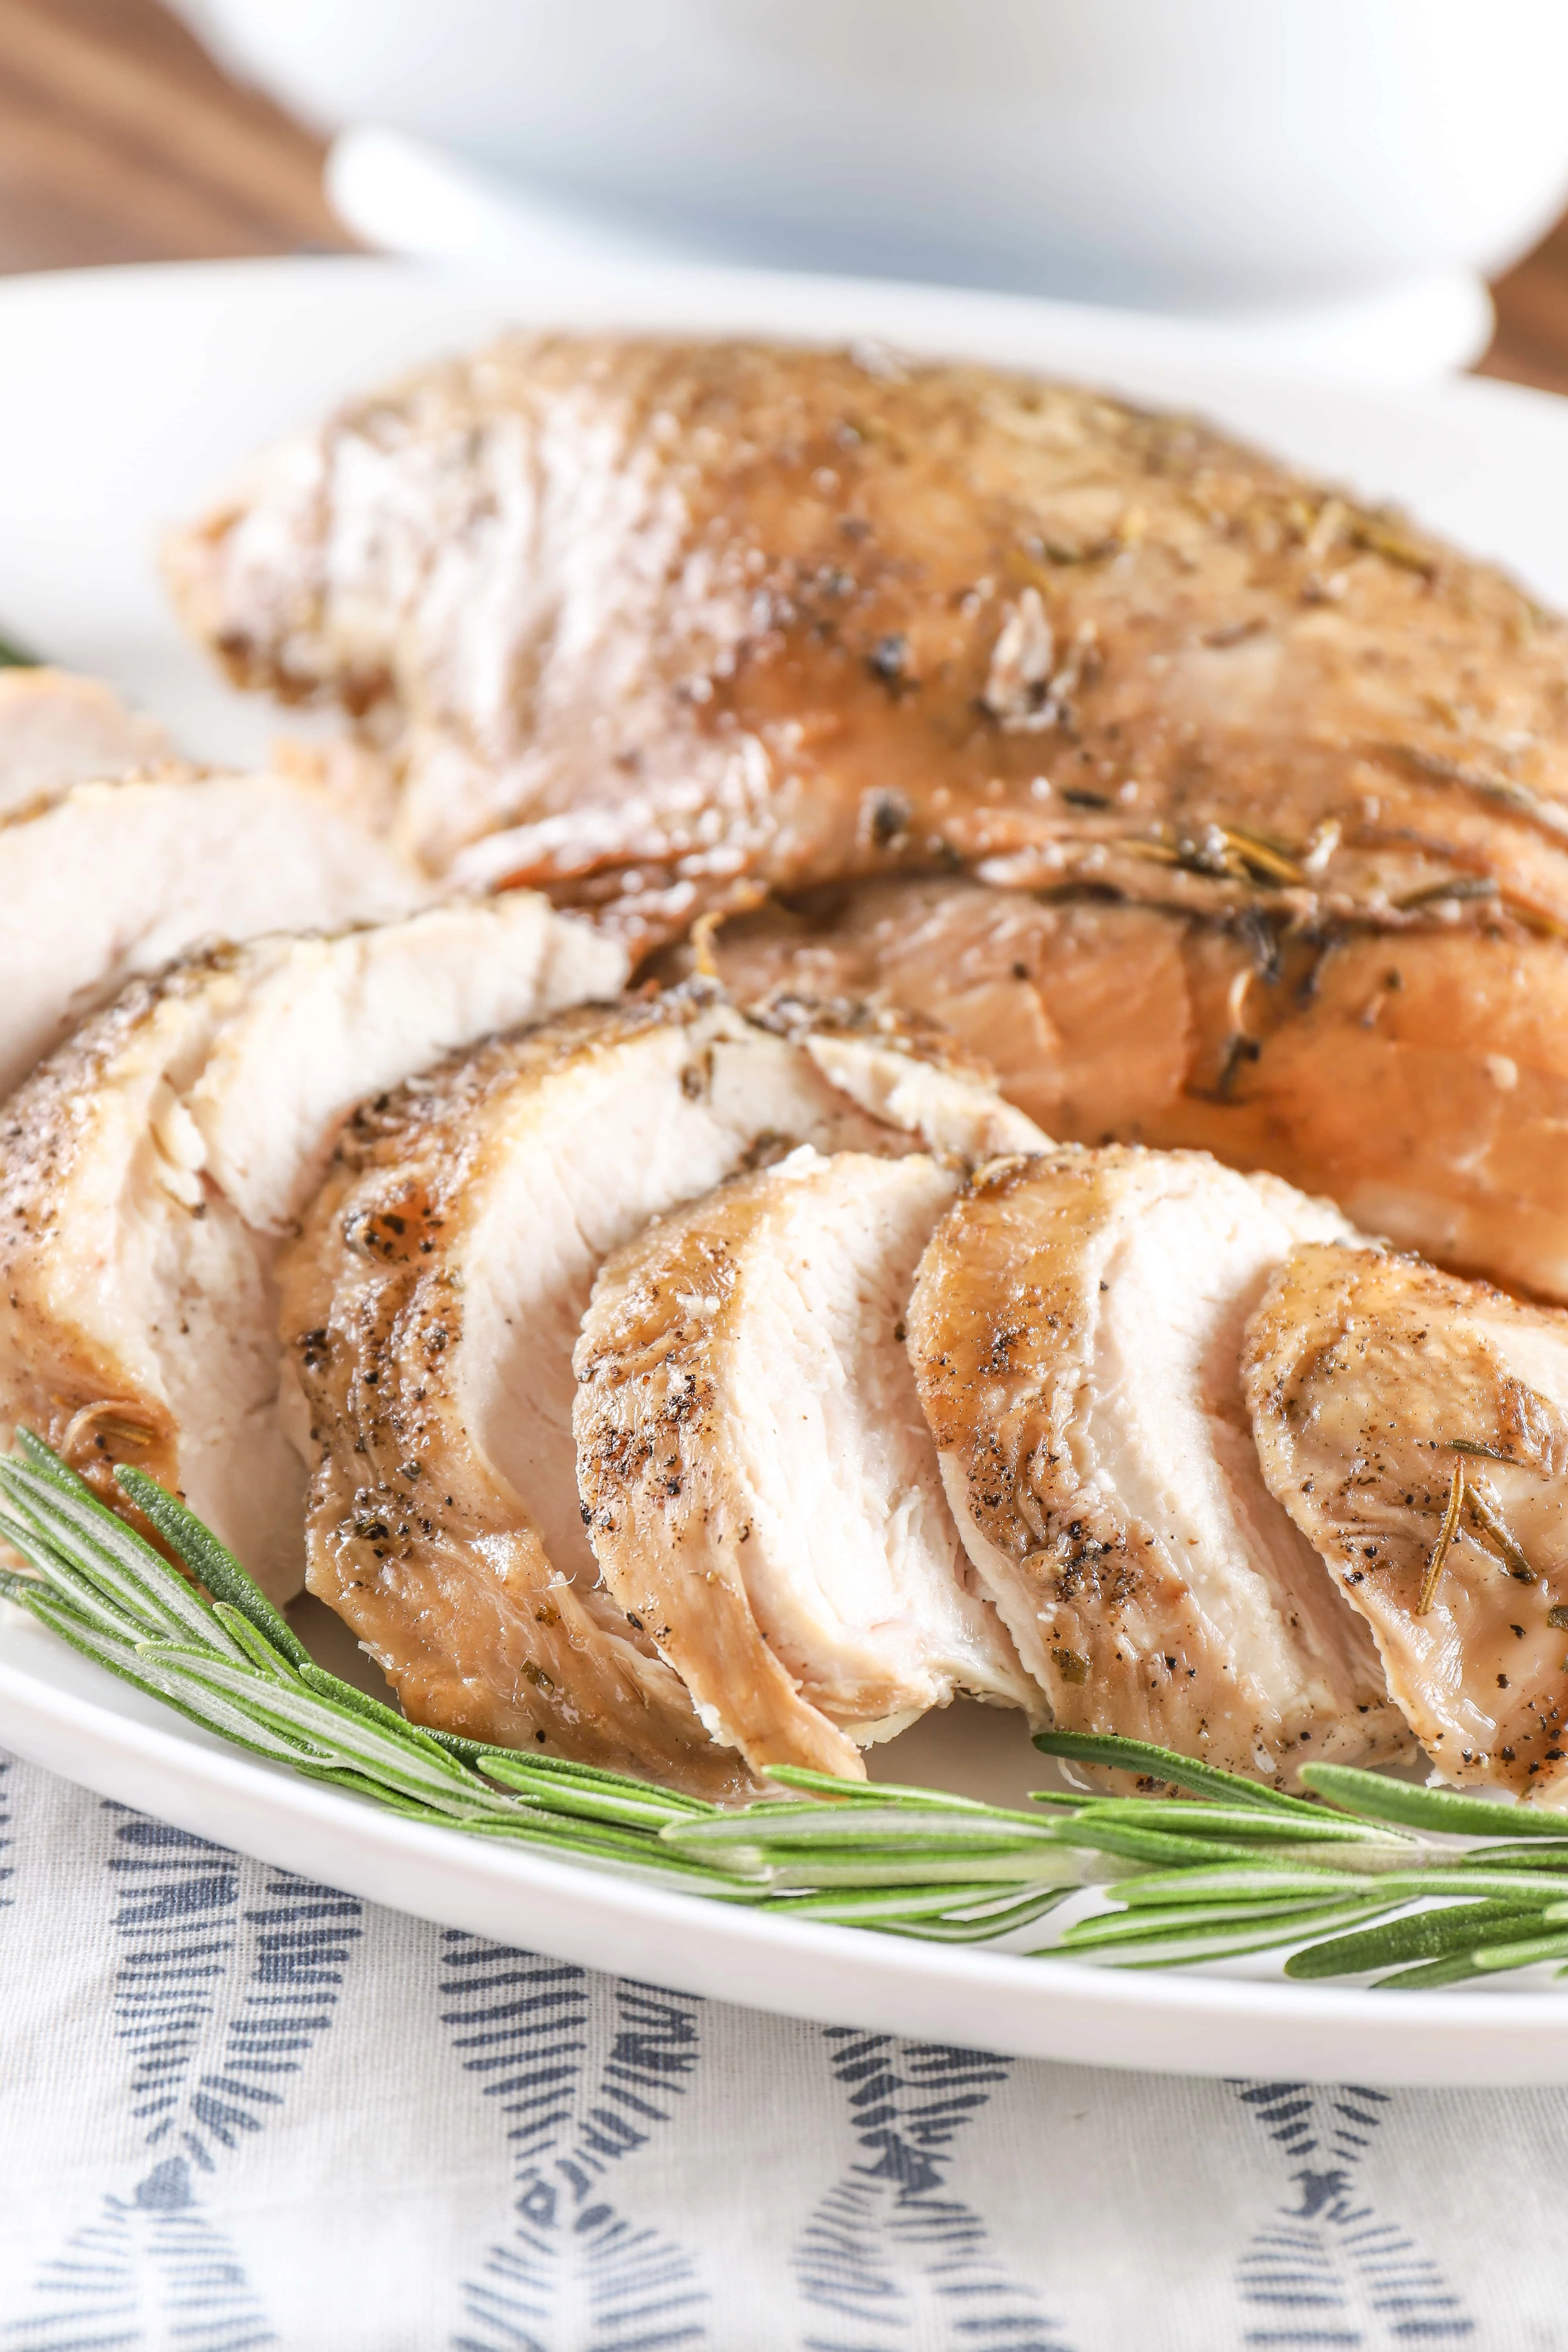 Slow Cooker Spiced Apple Cider Brined Turkey Breast Recipe